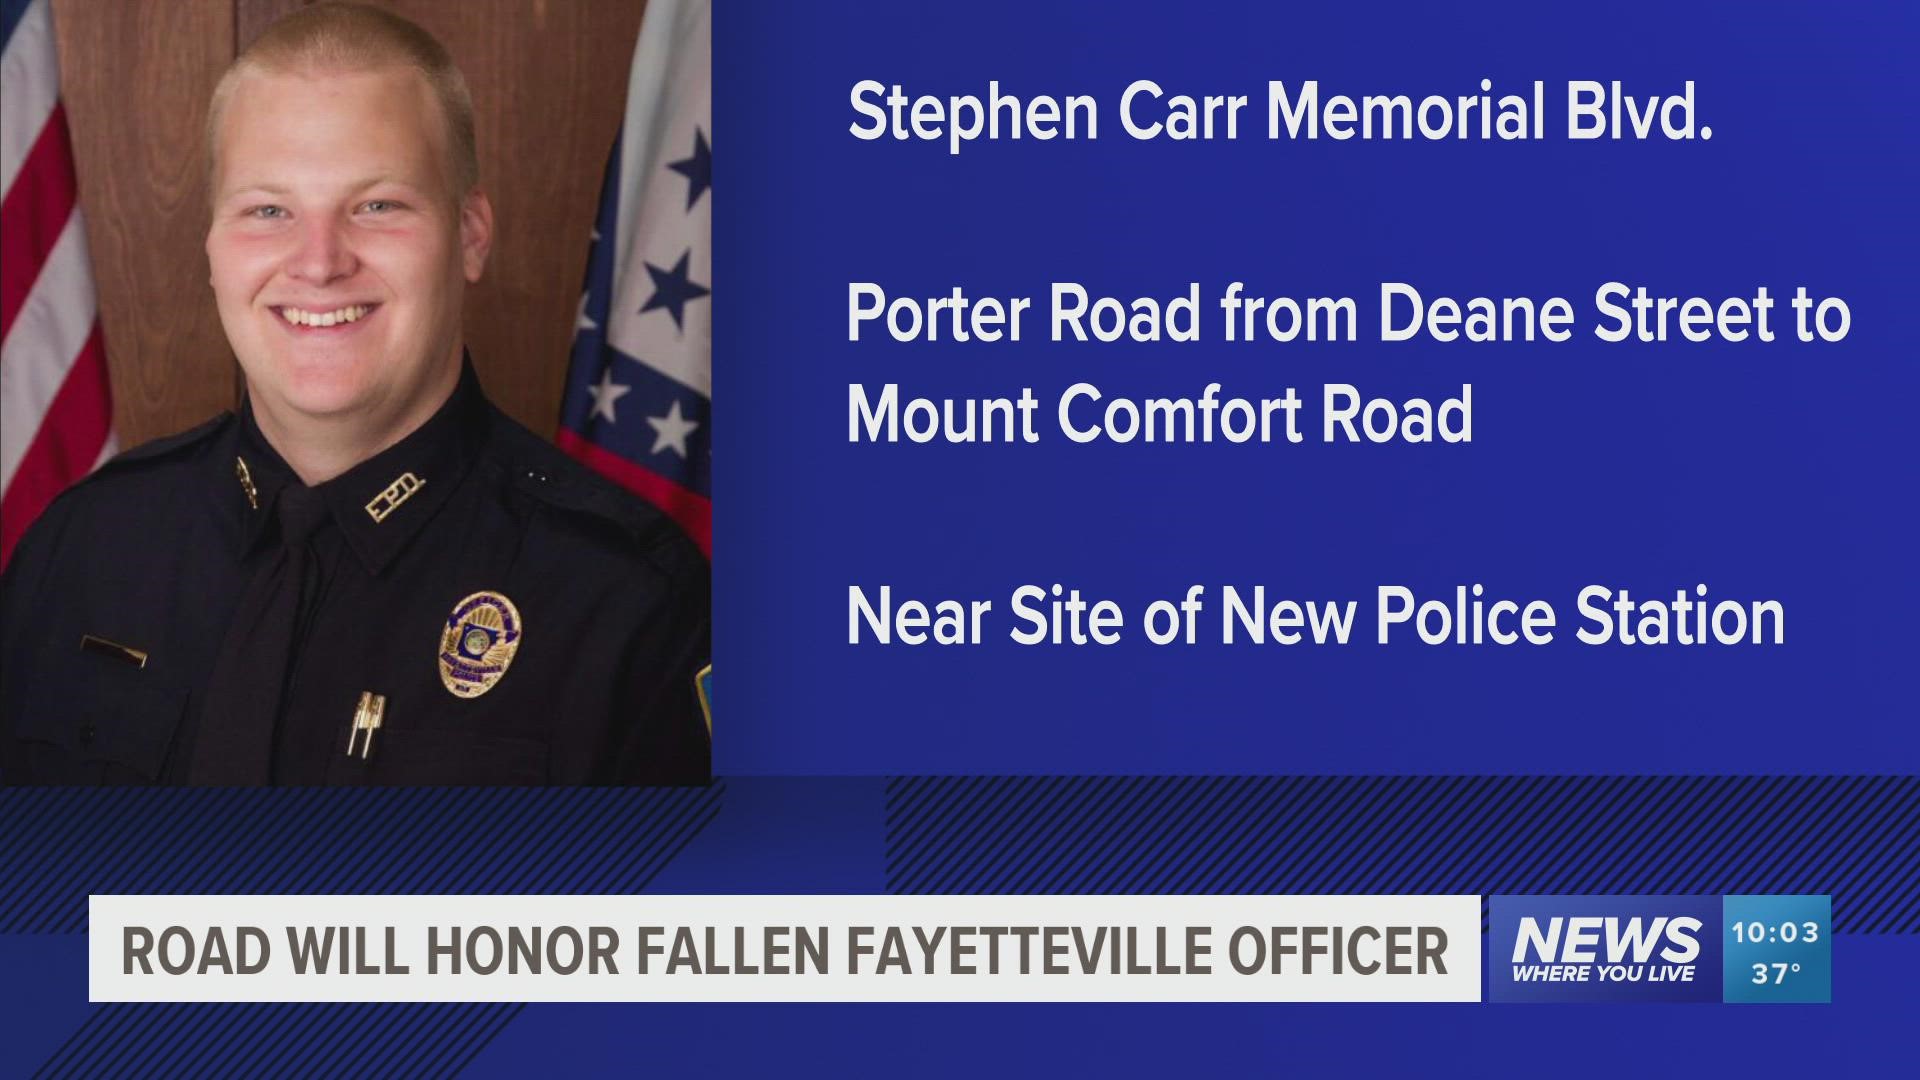 On Dec. 7, the Fayetteville council voted unanimously to approve Officer Stephen Carr Blvd street name.